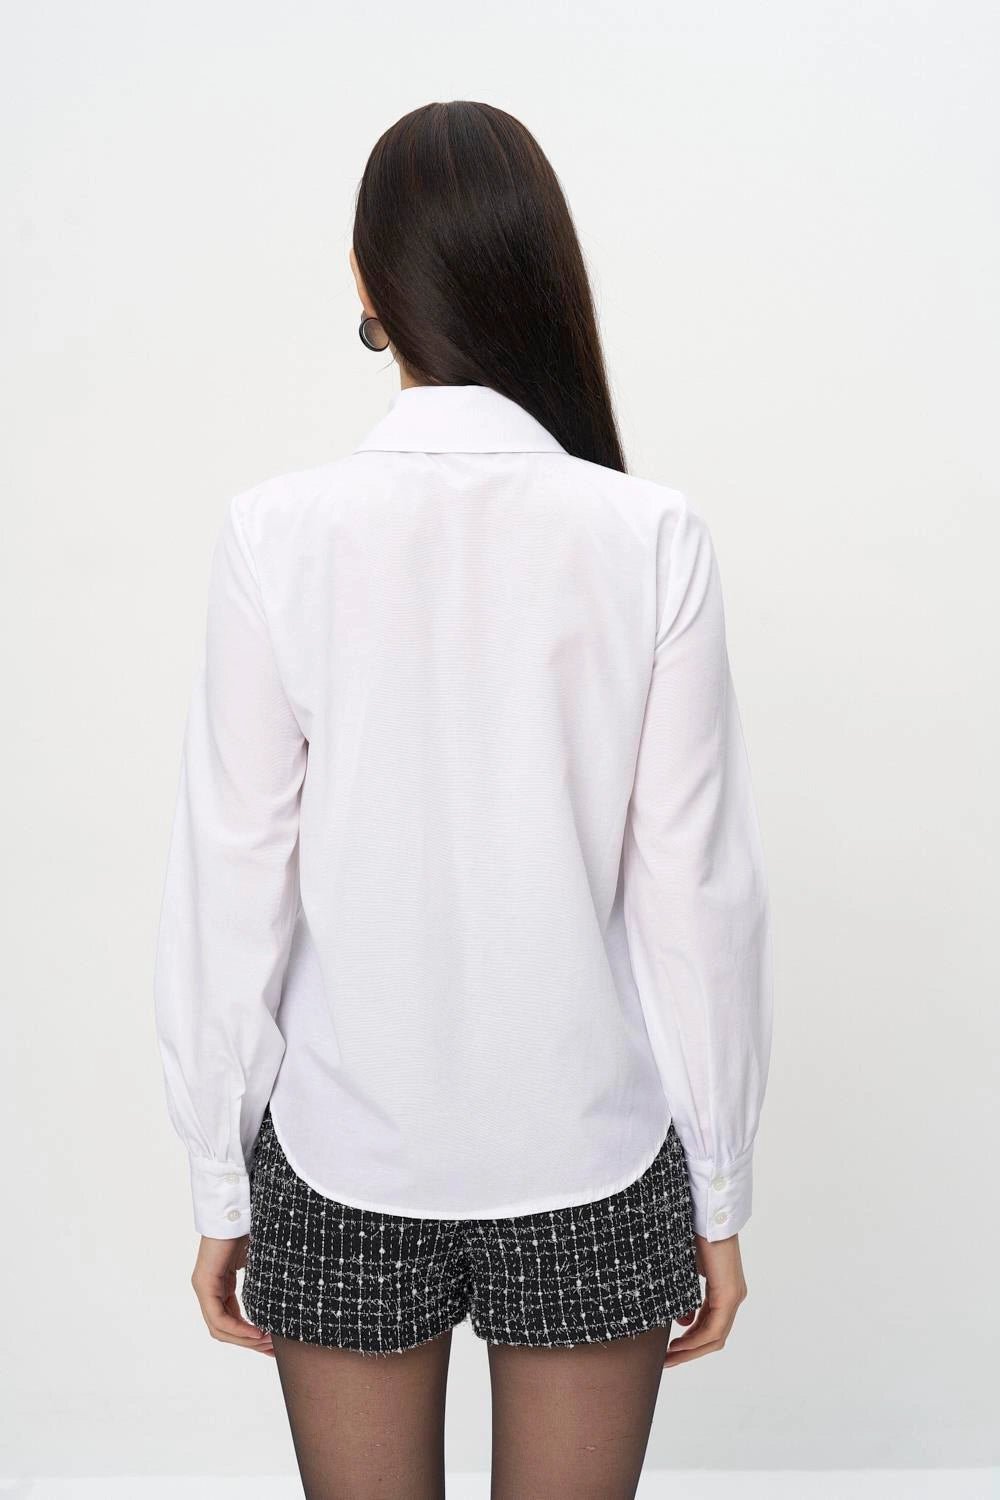 LONG SLEEVE WHITE WOMEN'S SHIRT WITH PEARL DETAILED ON THE COLLAR - Lebbse